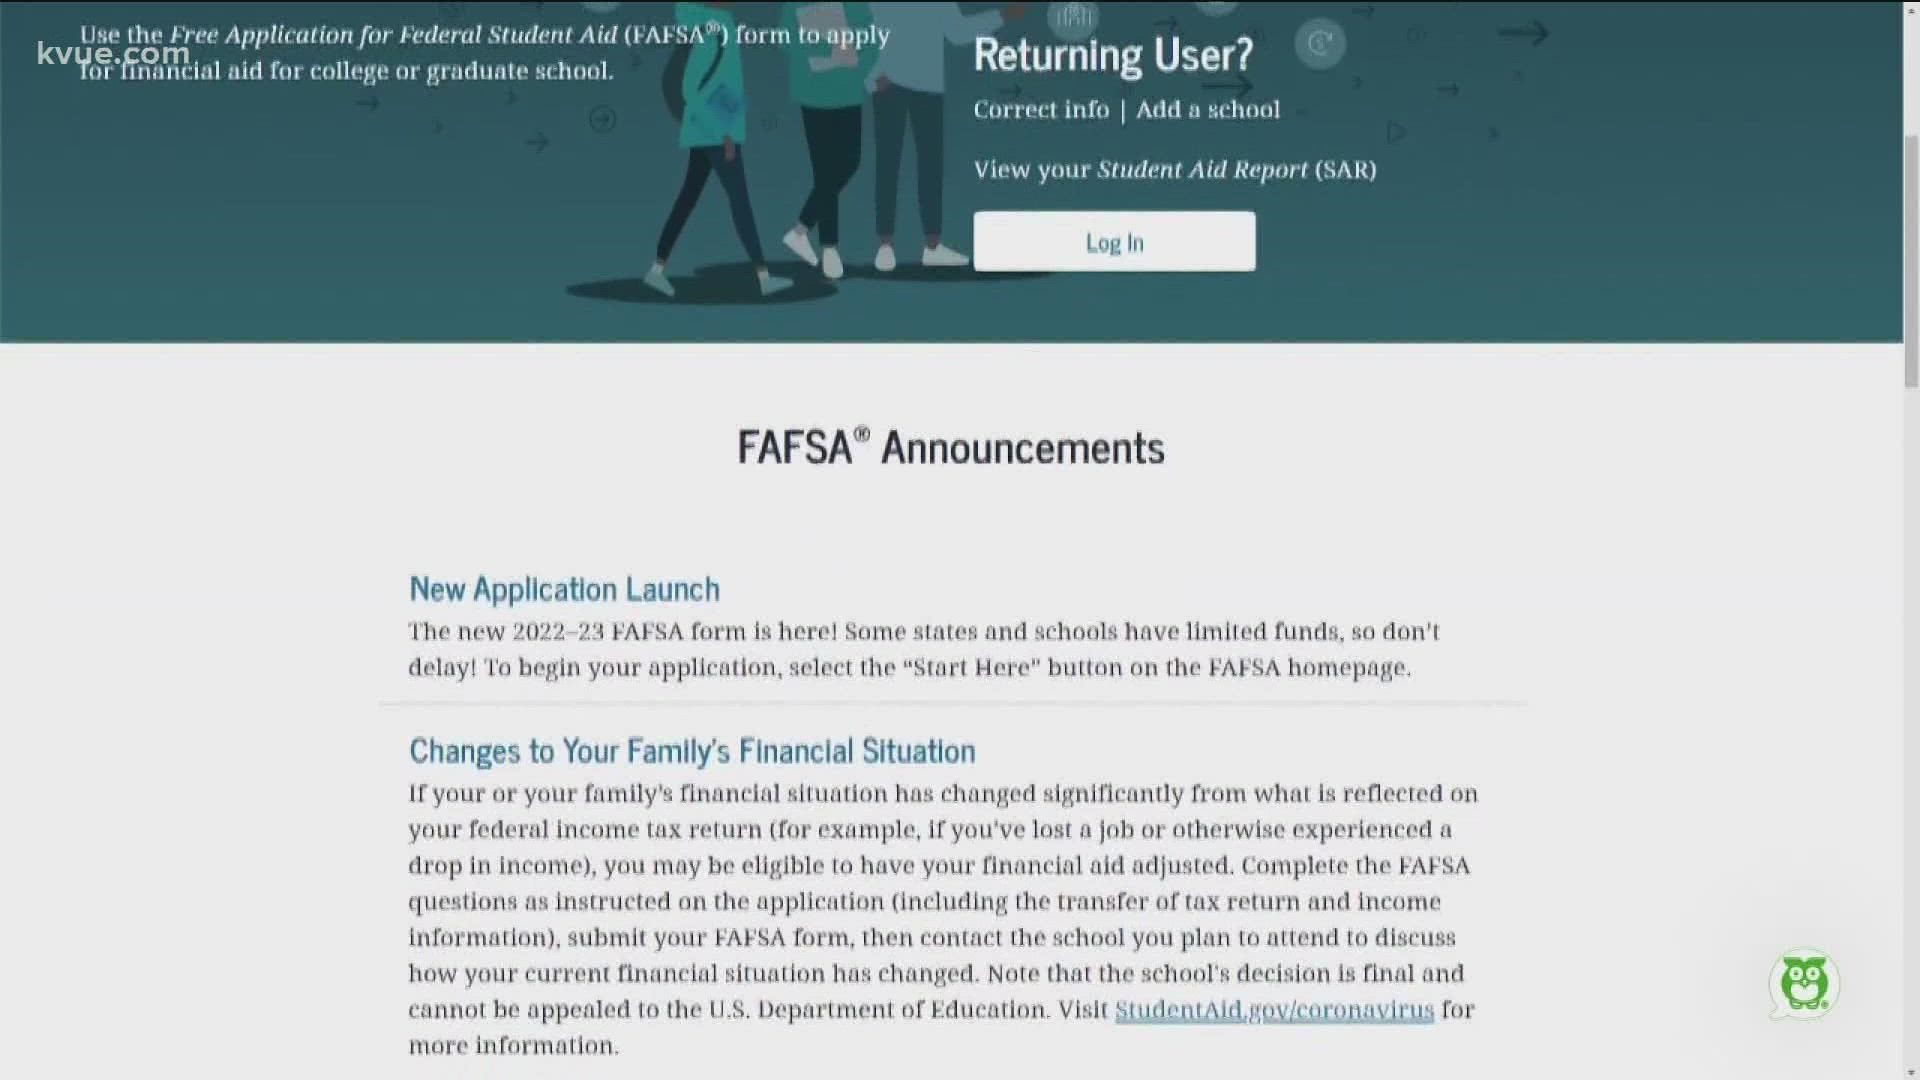 U.S. Rep. Lloyd Doggett, Austin ISD and others are holding a workshop Saturday morning to help parents apply for the FAFSA.